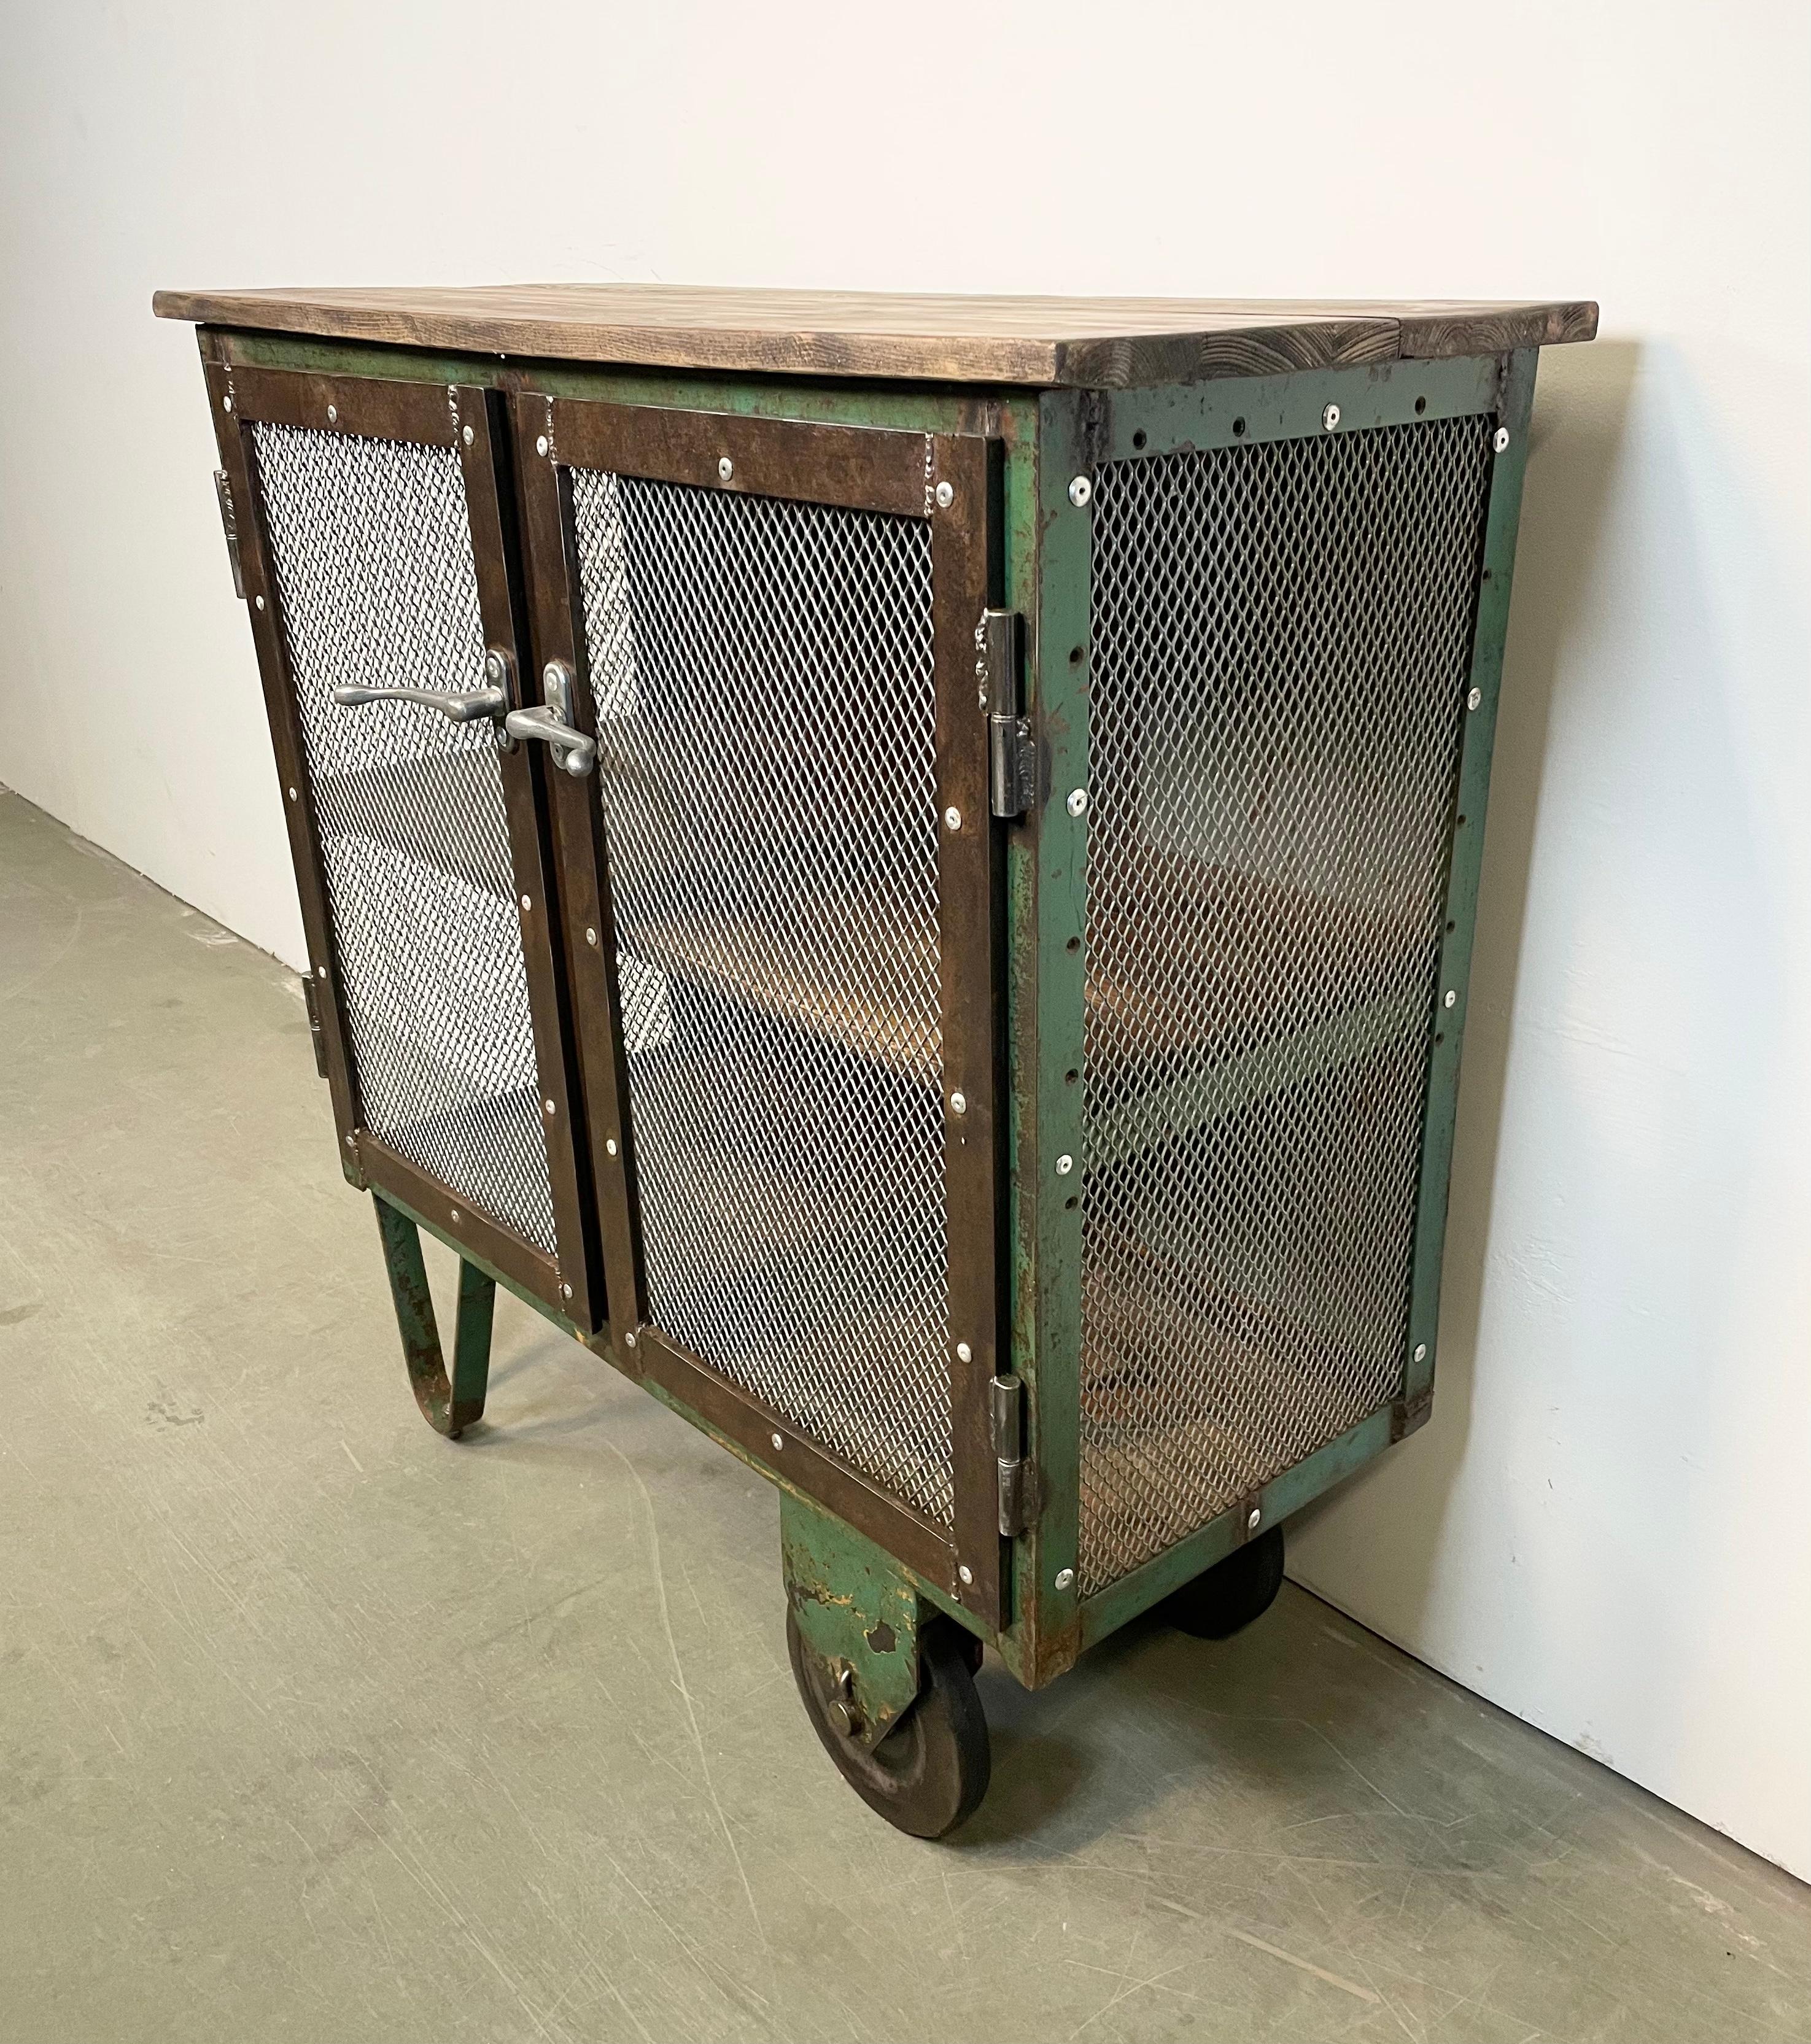 Czech Industrial Iron Cabinet with Mesh Doors on Wheels, 1960s For Sale